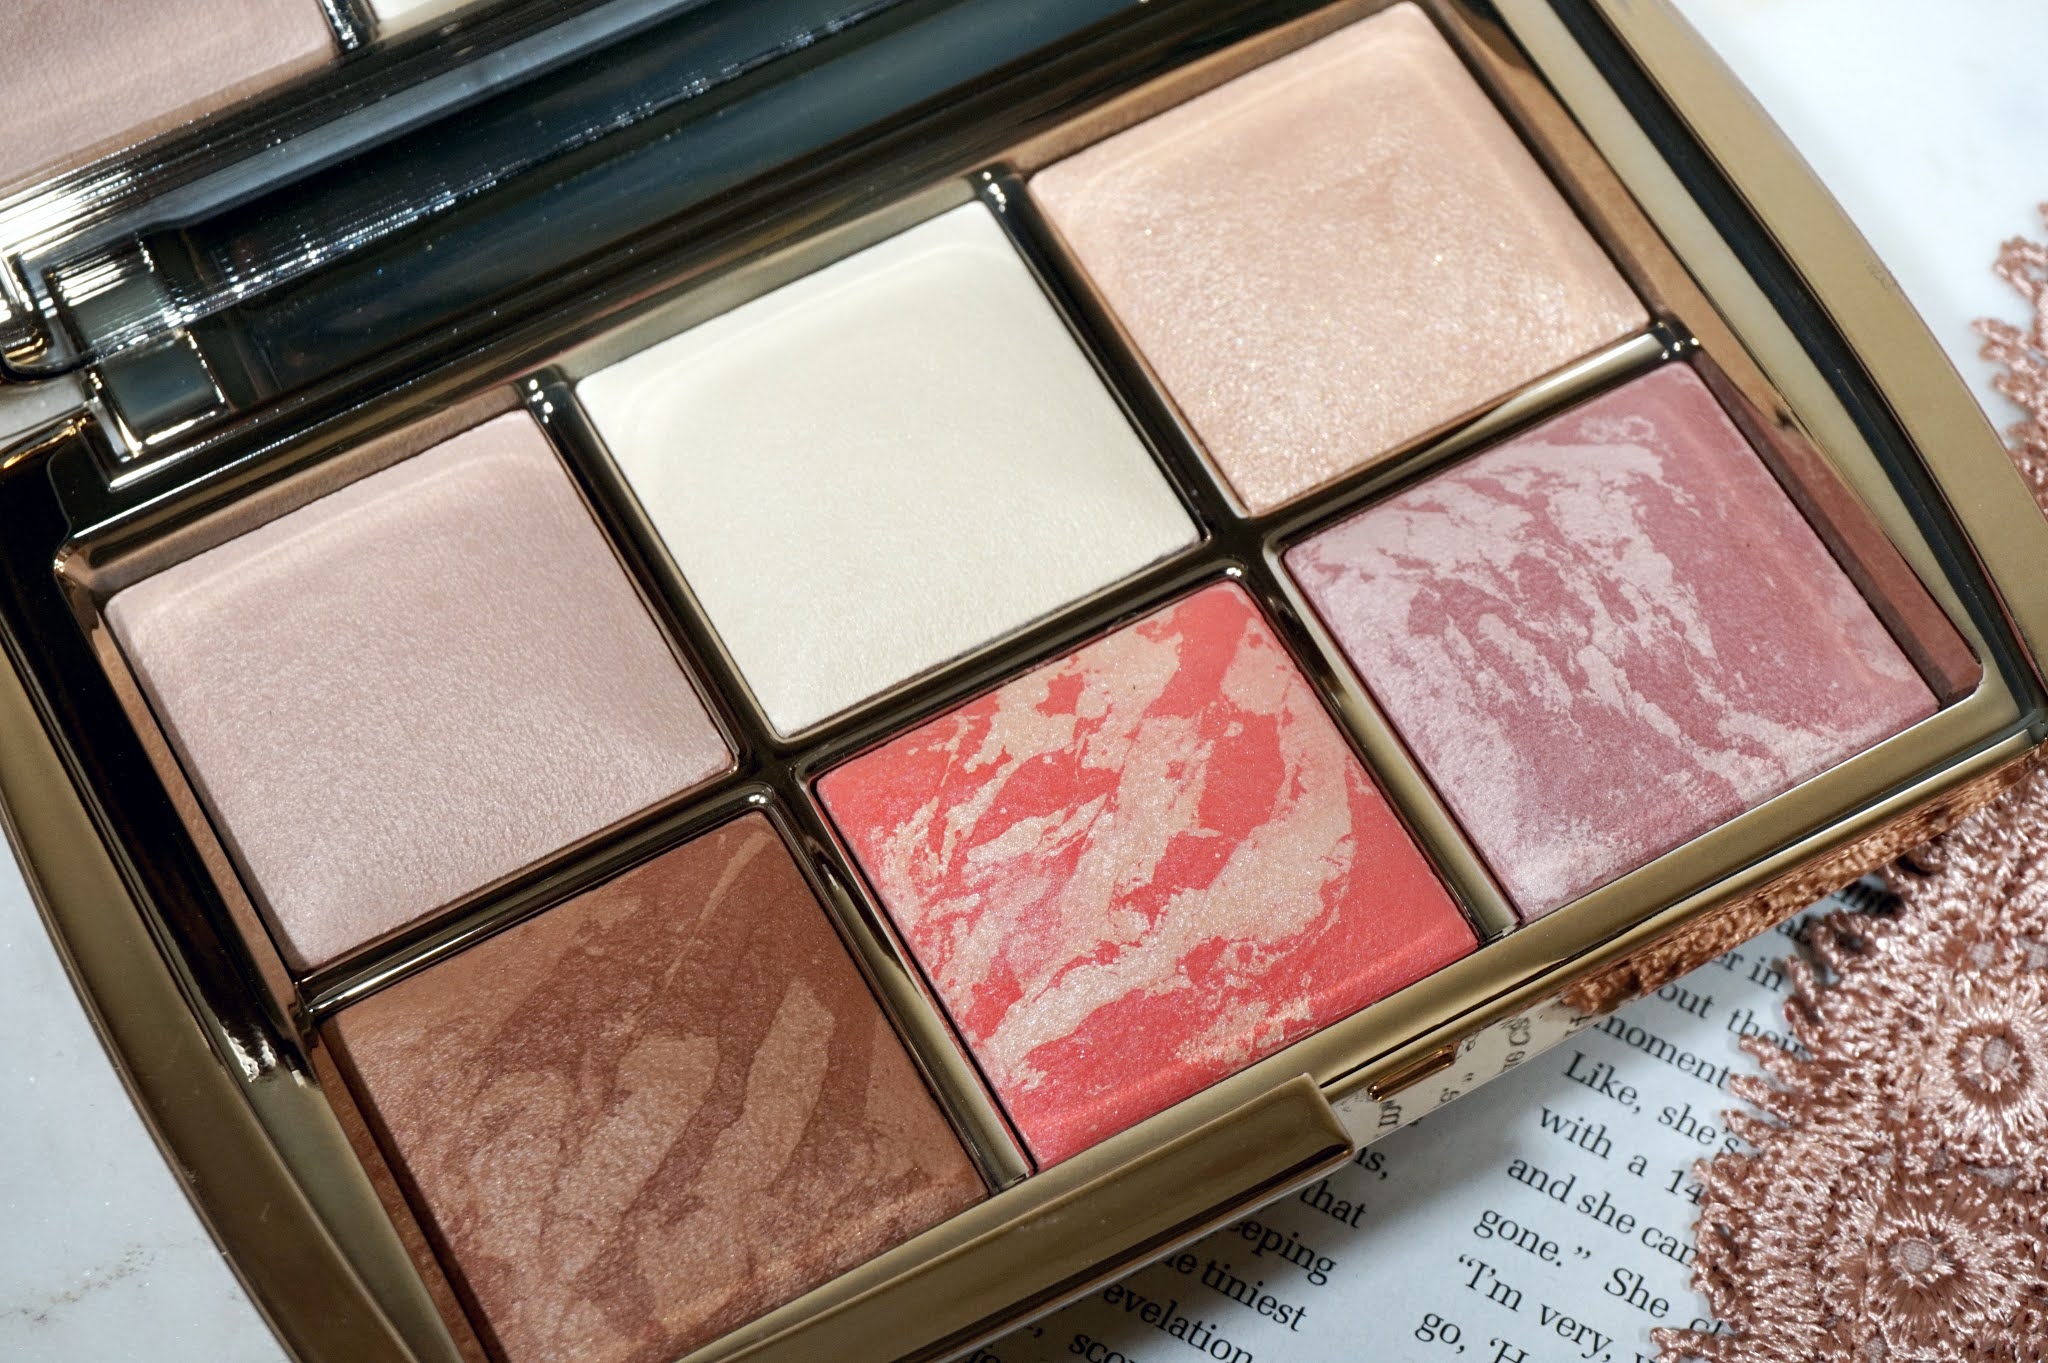 Bonde Ryg, ryg, ryg del Alperne Review | Hourglass Ambient Lighting Edit - Sculpture | PRETTY IS MY  PROFESSION